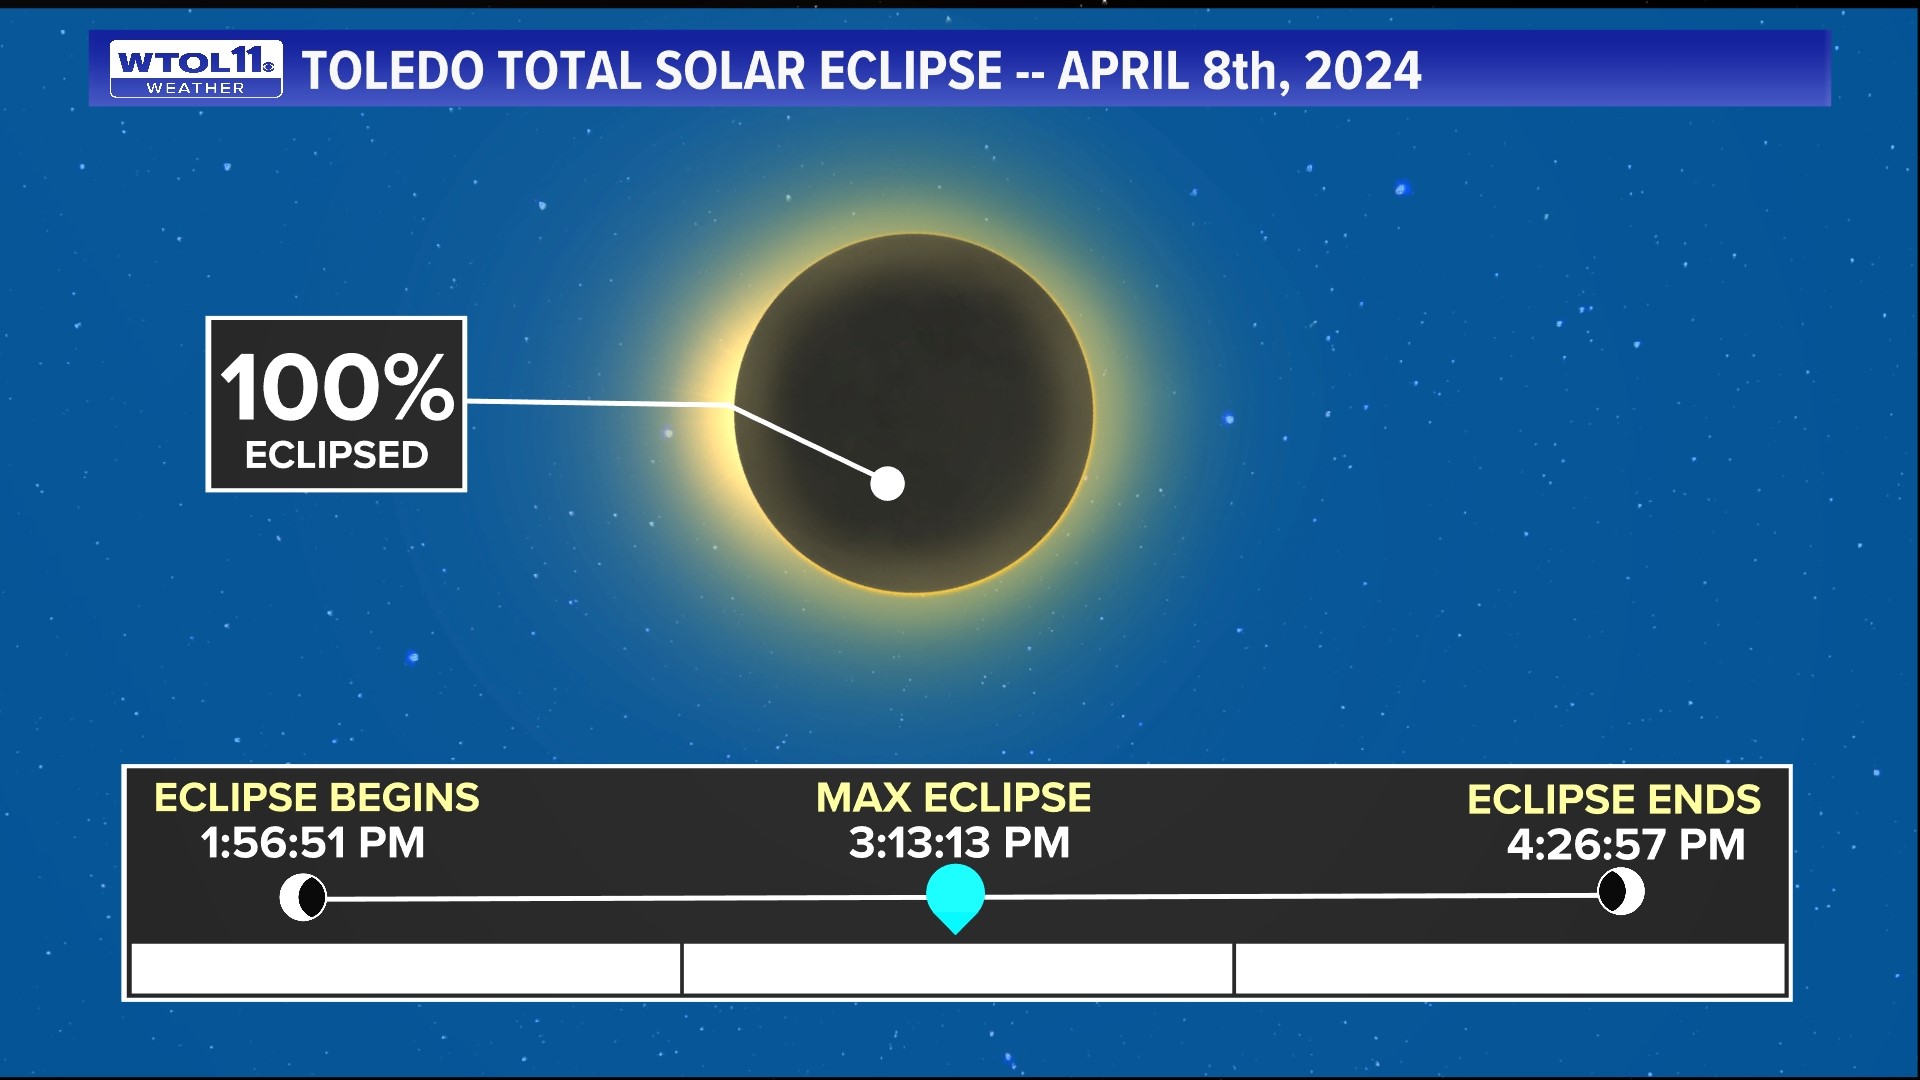 What is a total solar eclipse?